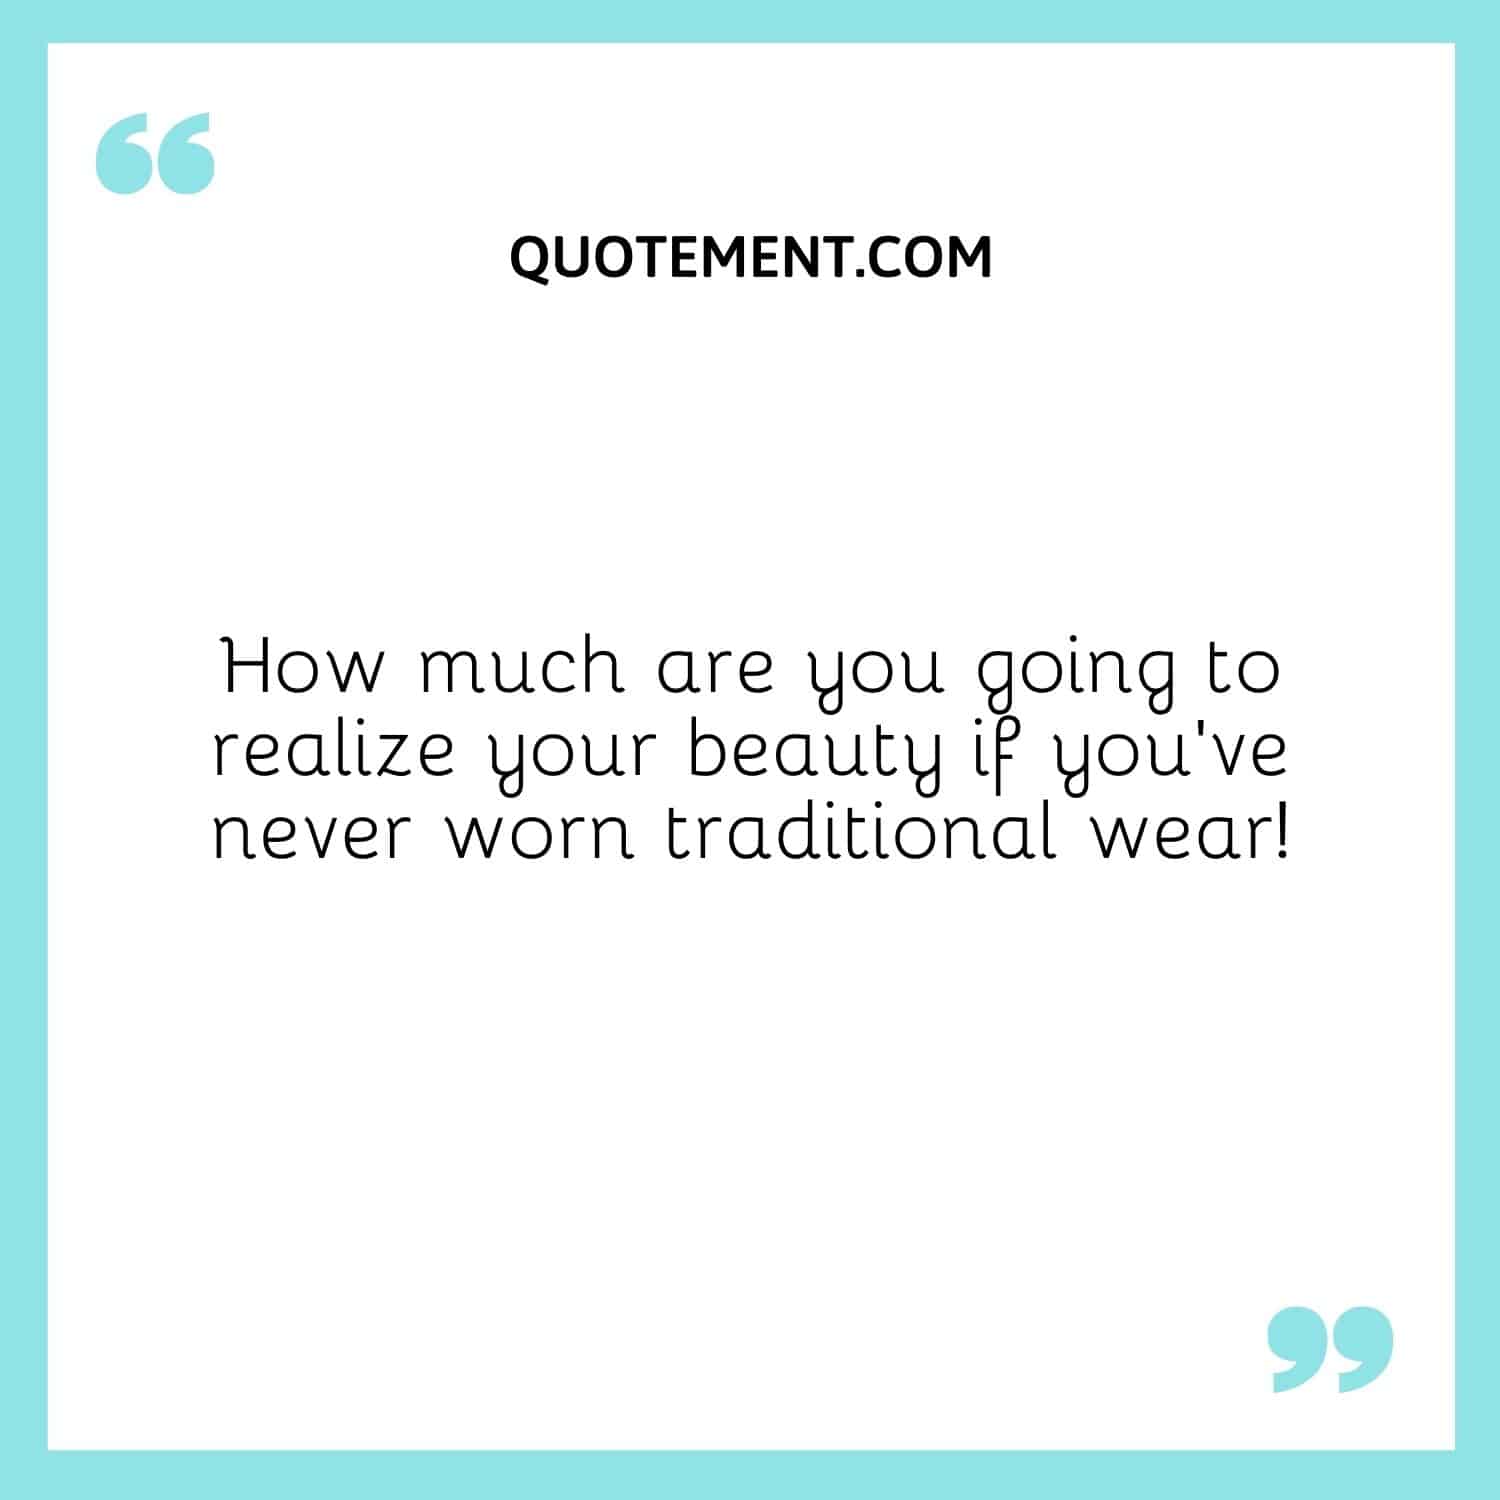 How much are you going to realize your beauty if you’ve never worn traditional wear!